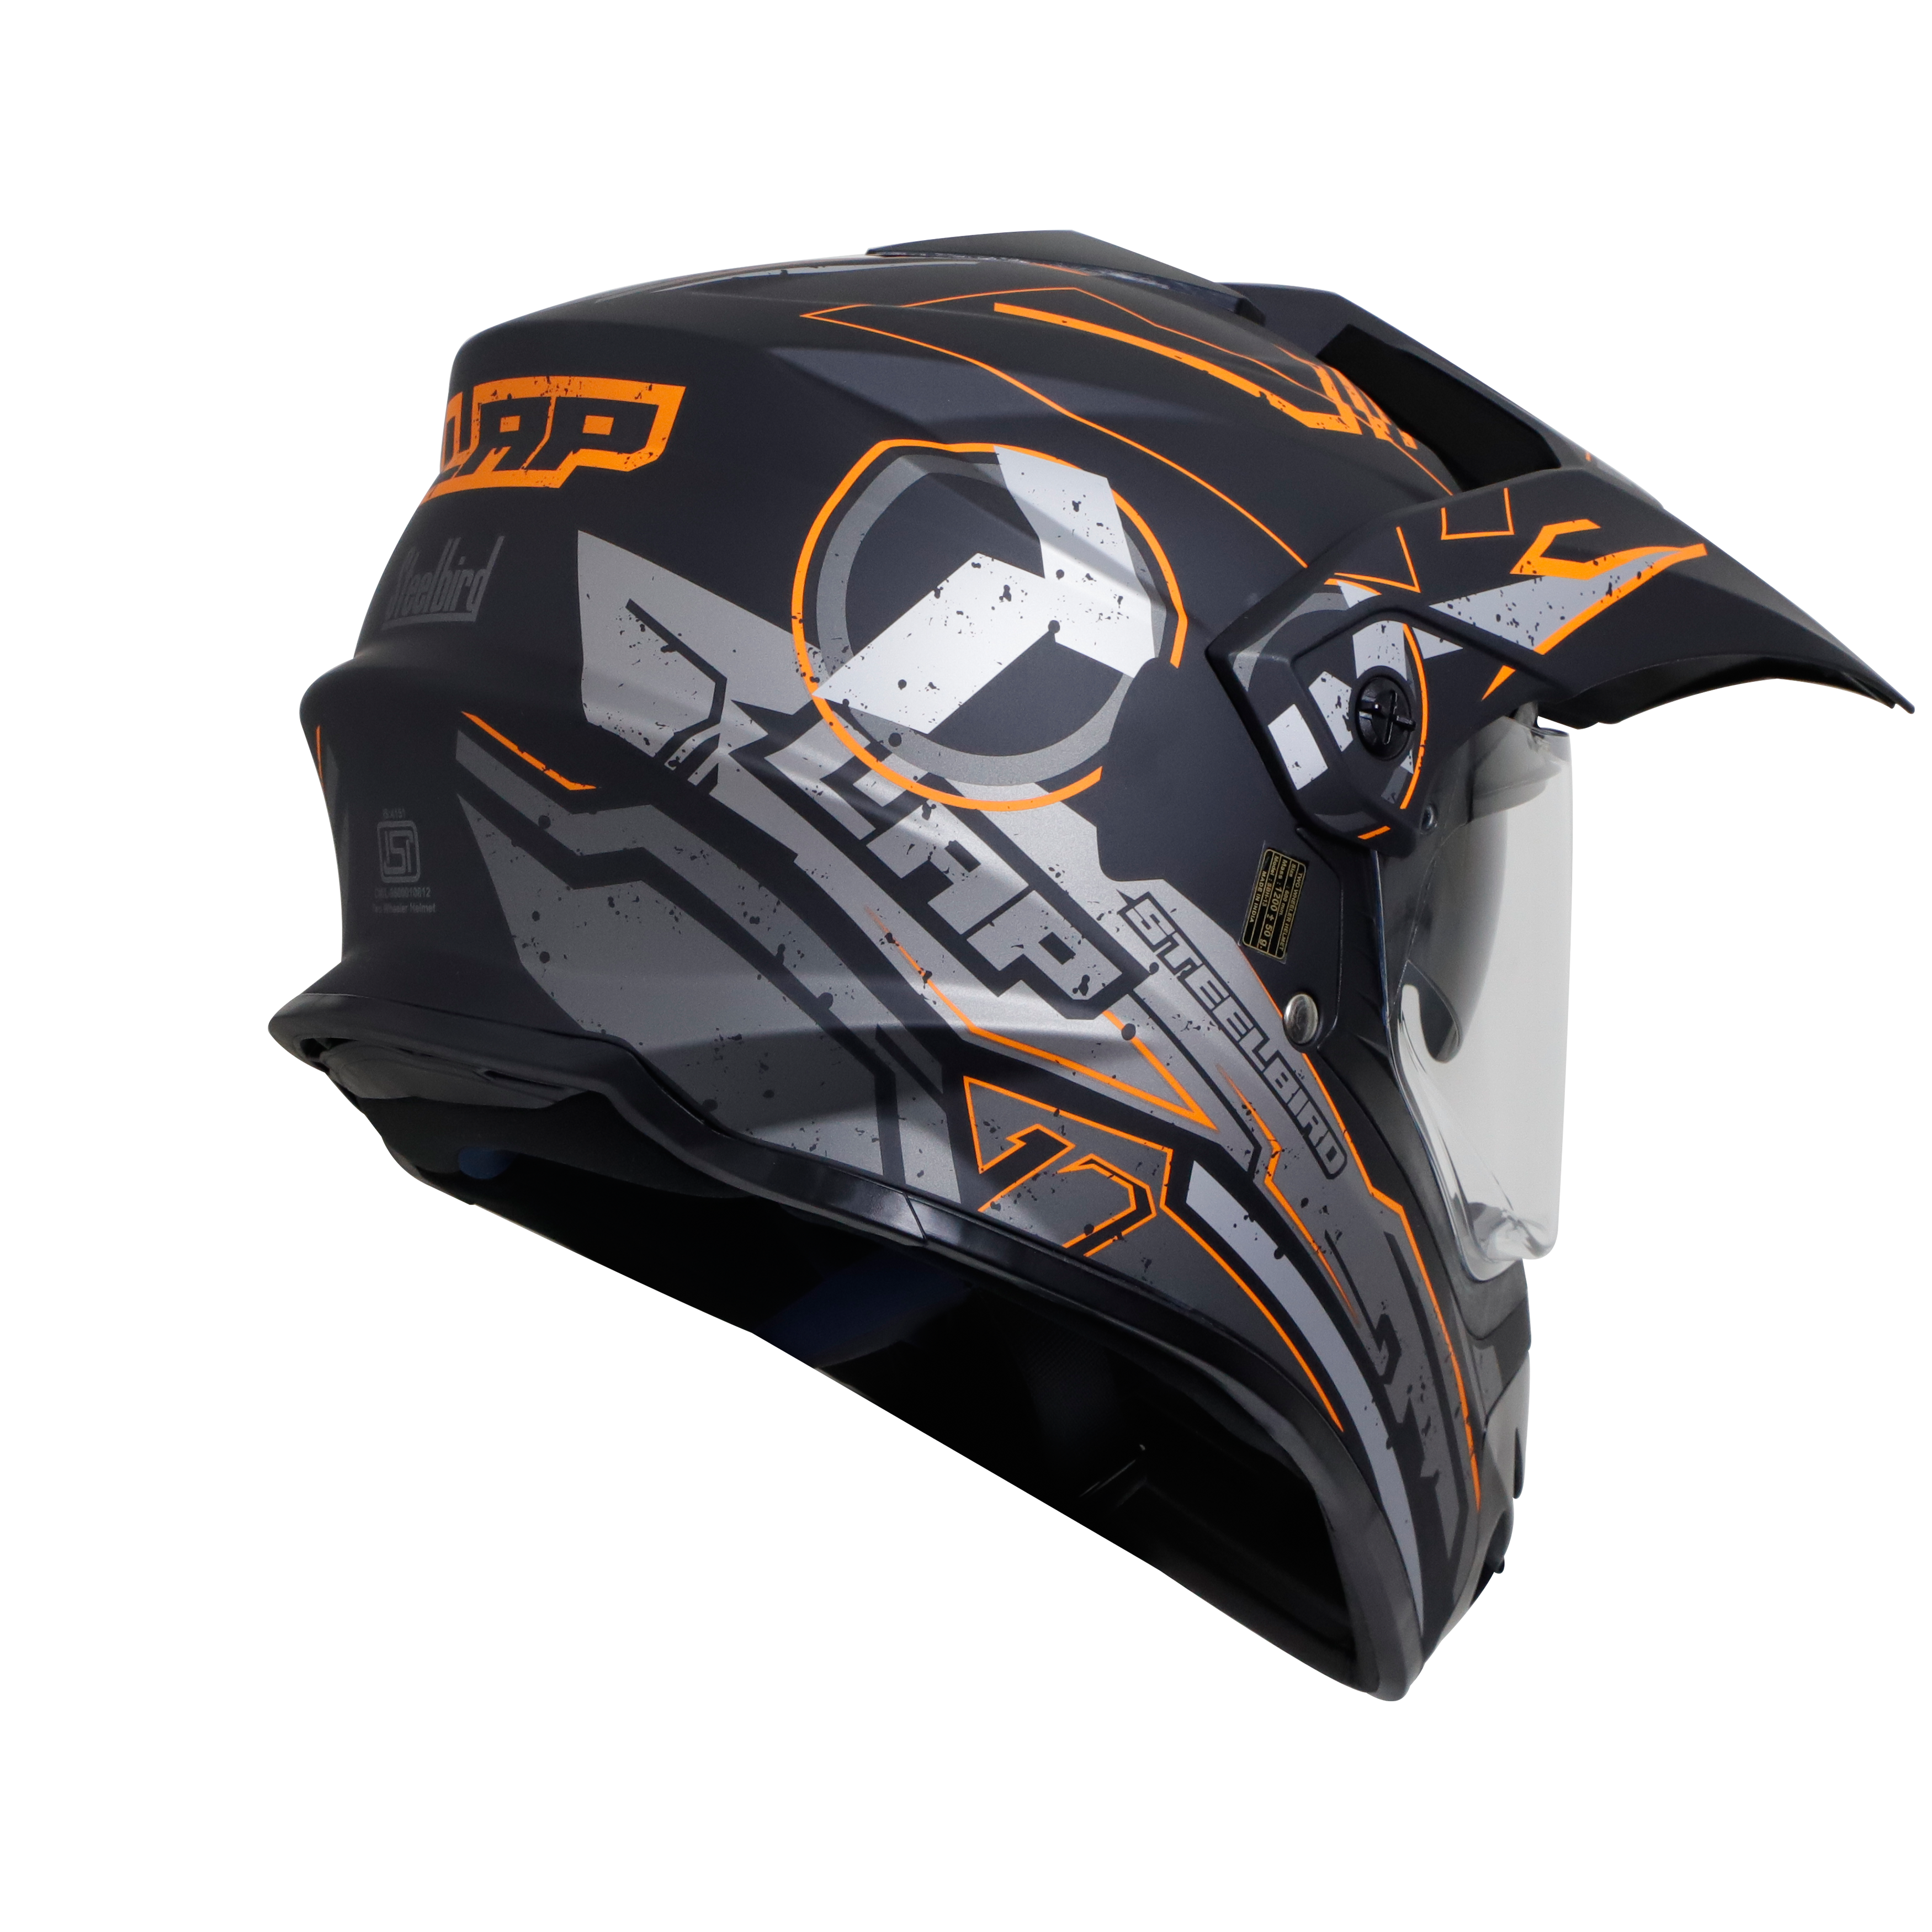 SB-42 BANG LAP GLOSSY BLACK WITH ORANGE (WITH CHROME SILVER INNER SUN SHIELD)